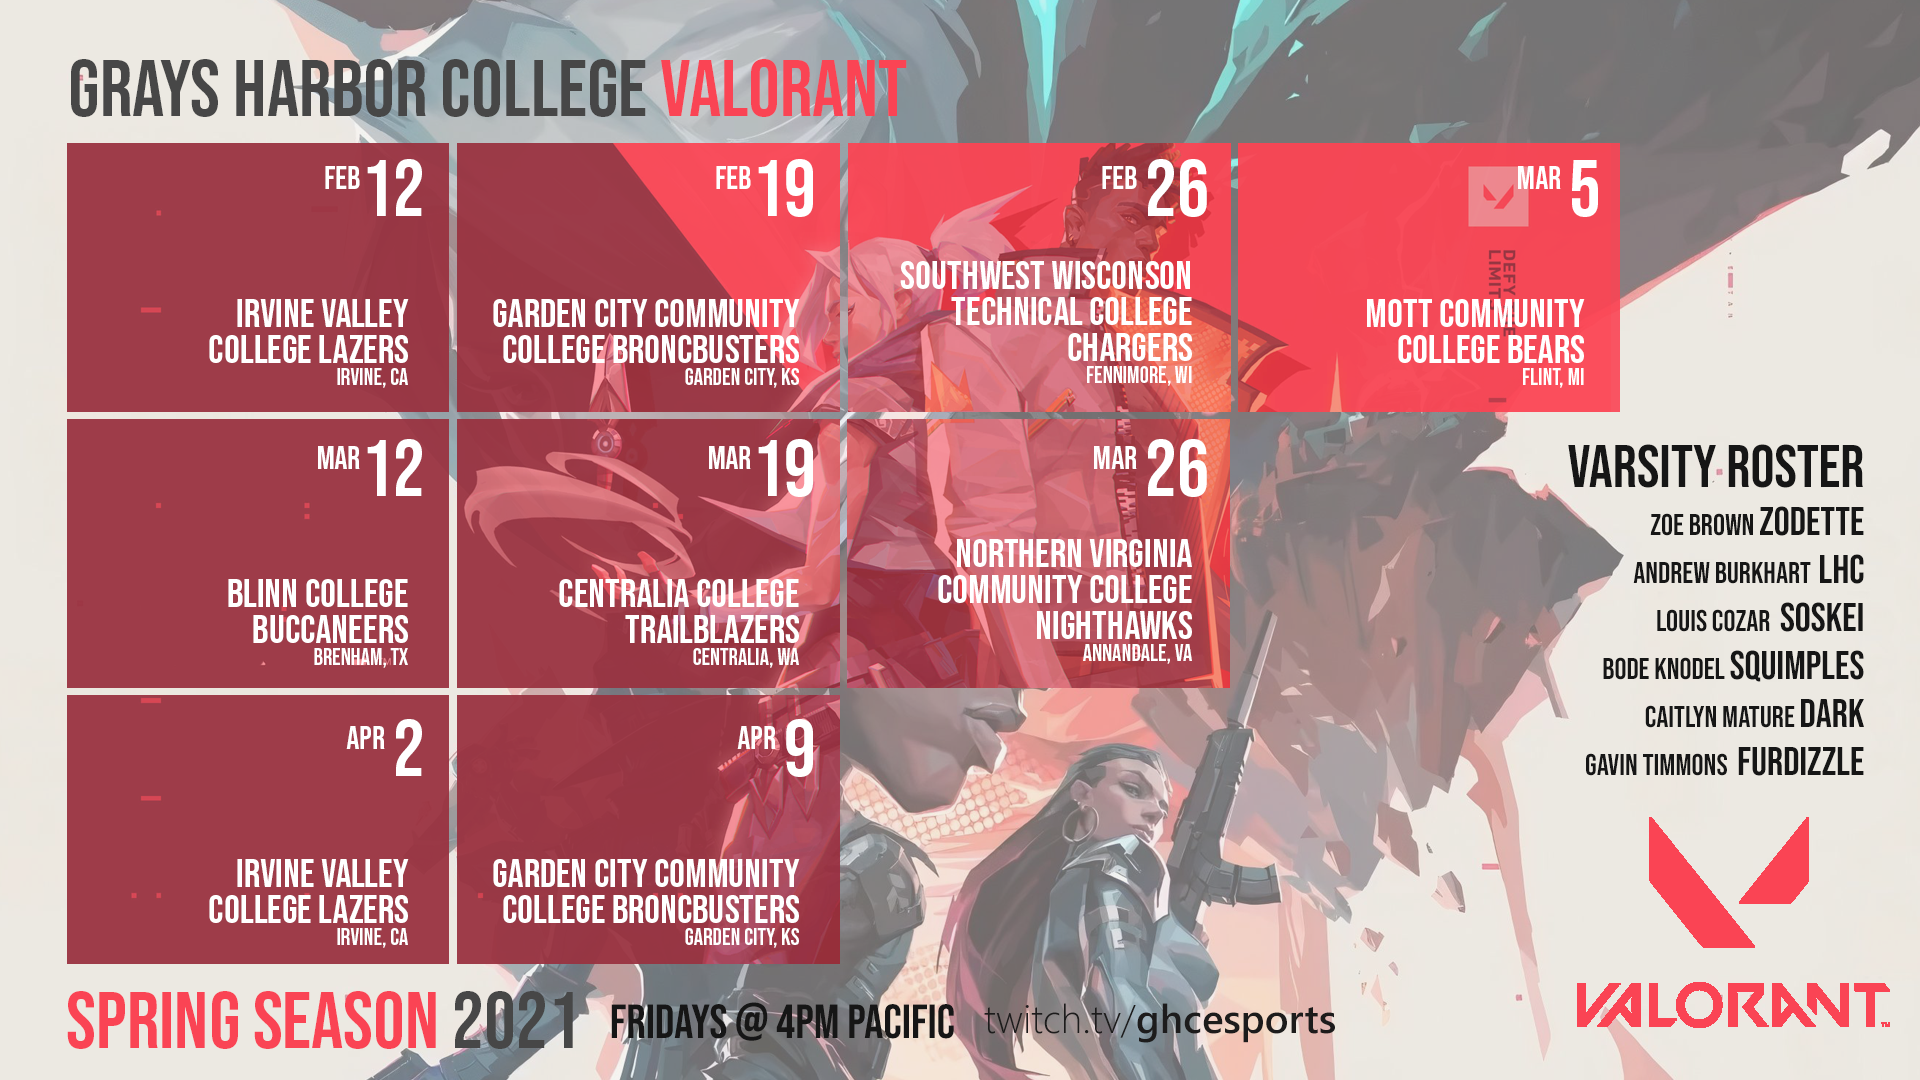 A schedule of Valorant games listed below in text